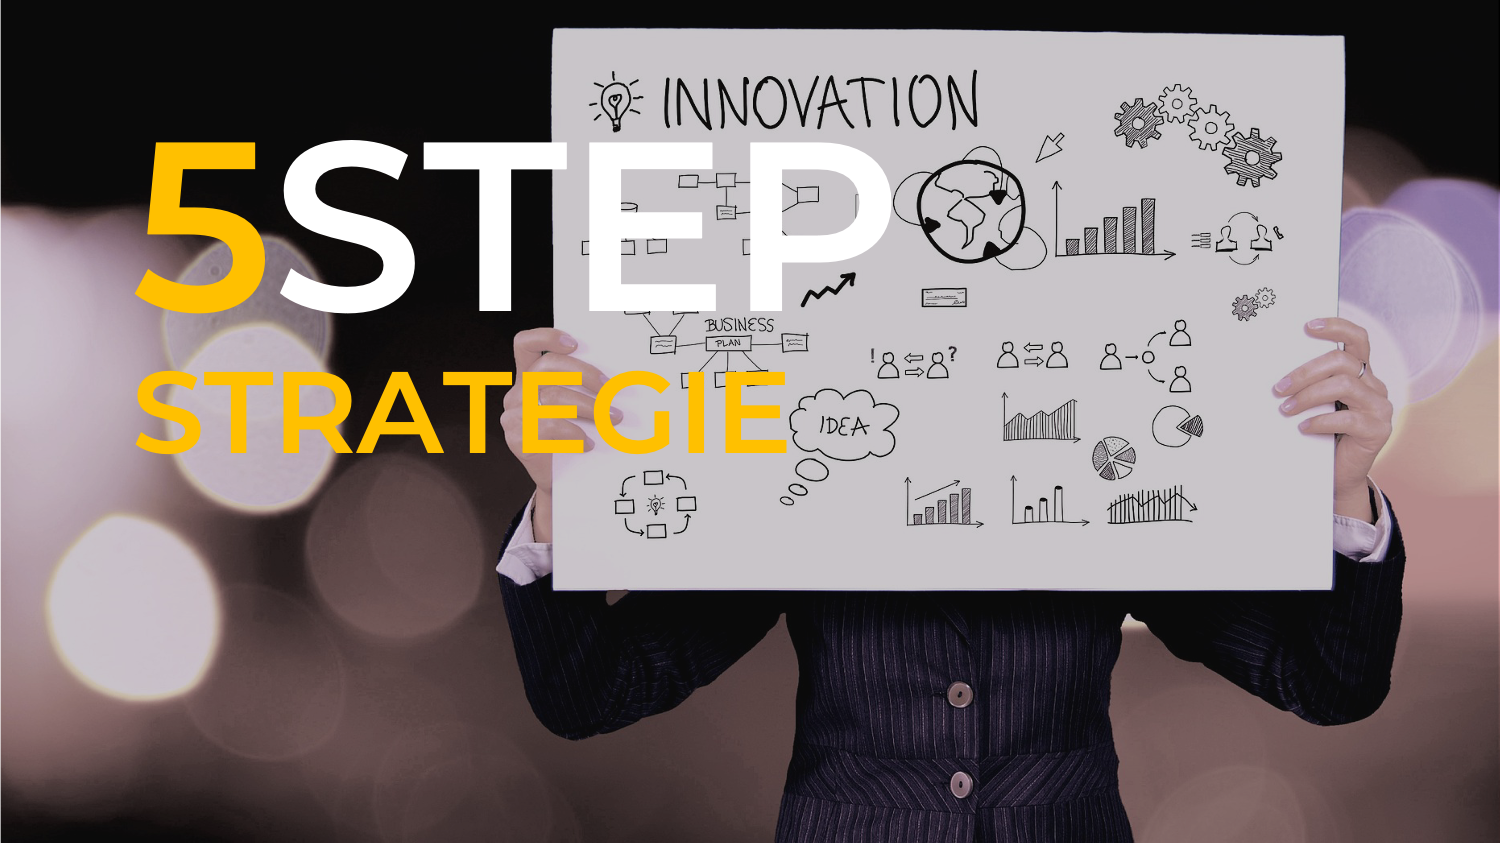 5STEP-Strategy HEADER _INNOVATION.png